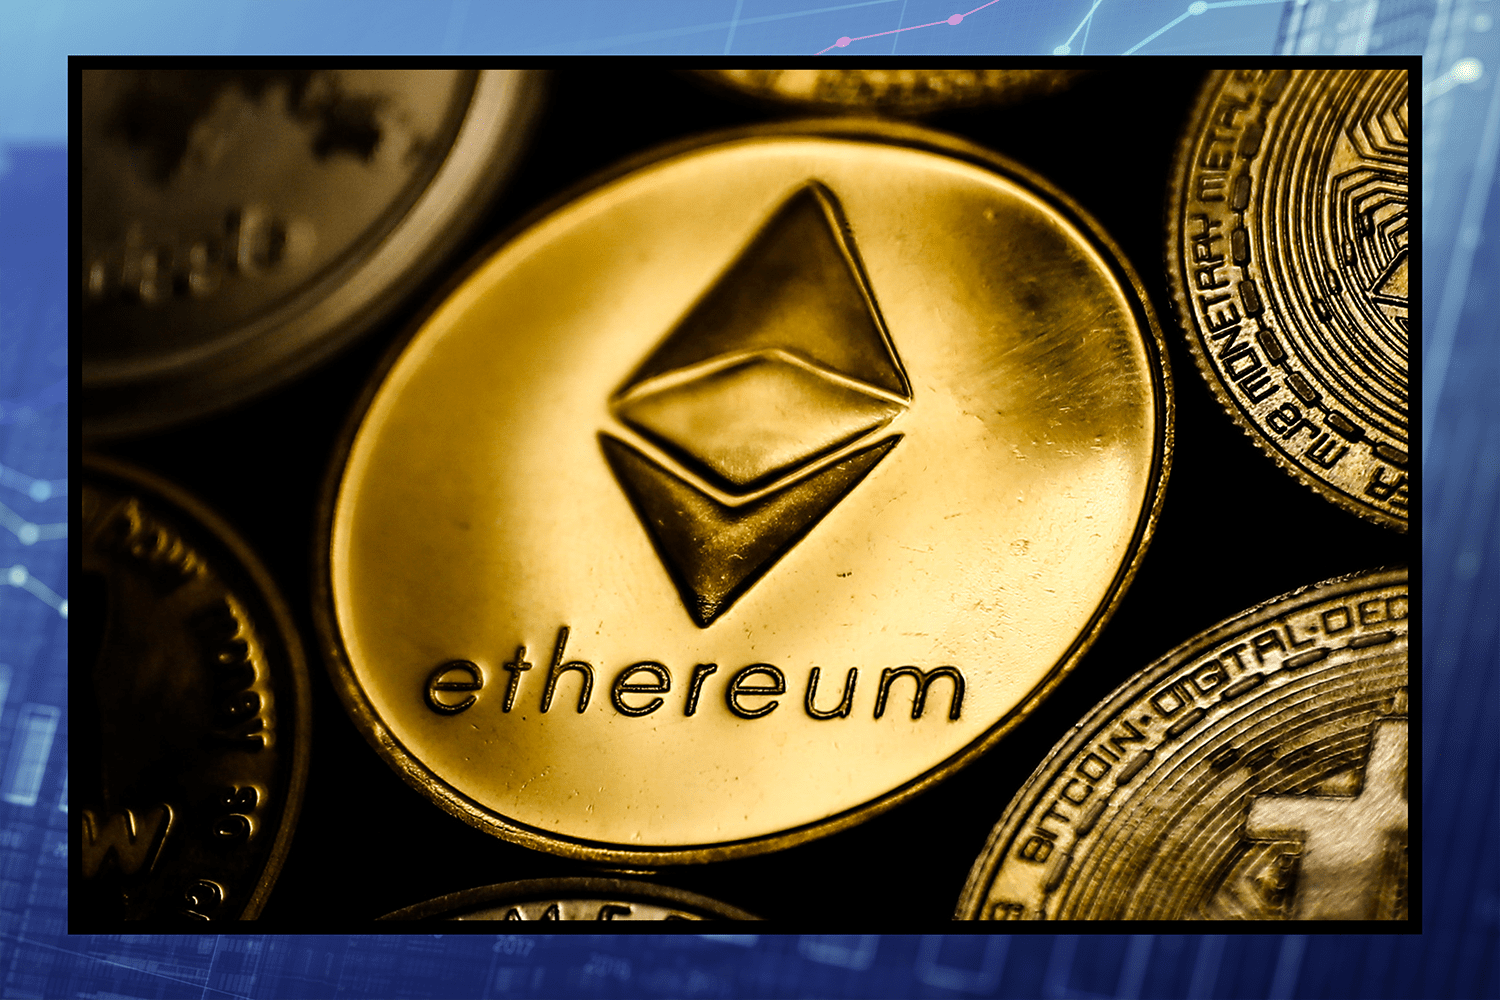 Ethereum (ETH) recorded a significant loss in price this week following the trading debut of Ethereum spot ETFs. According to data from CoinMarketCap, ETH has declined by 6.60% in the last seven days, falling as low as $3,100. However, amidst this price crash, CryptoQuant analyst burakkesmeci has made an important observation with a potential impact on market movement. Related Reading: Ethereum Targets Recovery: Can It Mirror Bitcoin’s Performance? Ethereum Open Interest Surges By $1.5 Billion In Three Weeks In a Quicktake post on CryptoQuant, burrakesmeci shared that the Open Interest (OI) on Ethereum has risen by a remarkable $1.5 billion in the past three weeks. For context, Open Interest refers to the total number of outstanding positions for a particular asset. Generally, an increase in Open Interest indicates a rise in market participation for any asset i.e., more traders are opening long or short positions on Ethereum. With this rise in open positions, there is likely an equal increase in the number of leverage trades. Burakkesmeci expressed that a surge in liquidations should also be expected as leveraged trades, which are open with borrowed funds, are always closed once an insufficient price margin occurs. Furthermore, This increase in leverage trading liquidations is expected to produce a high market volatility, resulting in unpredictable and rapid price movements. In regards to price action, a rise in Open Interest indicates the current market trend is gaining stronger. Therefore, despite Ethereum’s price dip in the last week, the prominent altcoin is likely to extend its 7.01% gain of the past three weeks in the coming months. At the time of writing, Ethereum presently trades at $3,278.80 with a 3.46% increase in the last 24 hours. The altcoin appears to be attempting a market recovery with a strong resistance expected at the $3,500 region. However, if the current buying pressure proves insufficient to break past this barrier, Ethereum could return to the $3,100 price mark or even slide as low as $2,900. Related Reading: Ethereum Whales Rapidly Accumulate ETH Amid Price Decline Ethereum Spot ETFs Net Outflows Reach $469 Million In another development, the newly launched Ethereum Spot ETF market has now recorded a cumulative outflow of $469.83 million in its first three days of trading. Data from Farside Investors identifies Grayscale’s ETHE with a total outflow of $1.51 billion as the major cause of this current market position. Meanwhile, BlackRock’s ETHA continues to lead the market with inflows worth $354.8 million, followed closely by Bitwise’s ETHW with $265.9 million. Like their Bitcoin counterparts, the debut of the Ethereum spot ETF has been accompanied by a significant price drop. However, it remains uncertain whether these Ethereum ETFs will eventually trigger a price surge akin to the one experienced in the Bitcoin market during the initial two months of BTC Spot ETF trading. Featured image from Investopedia, chart from Tradingview.com